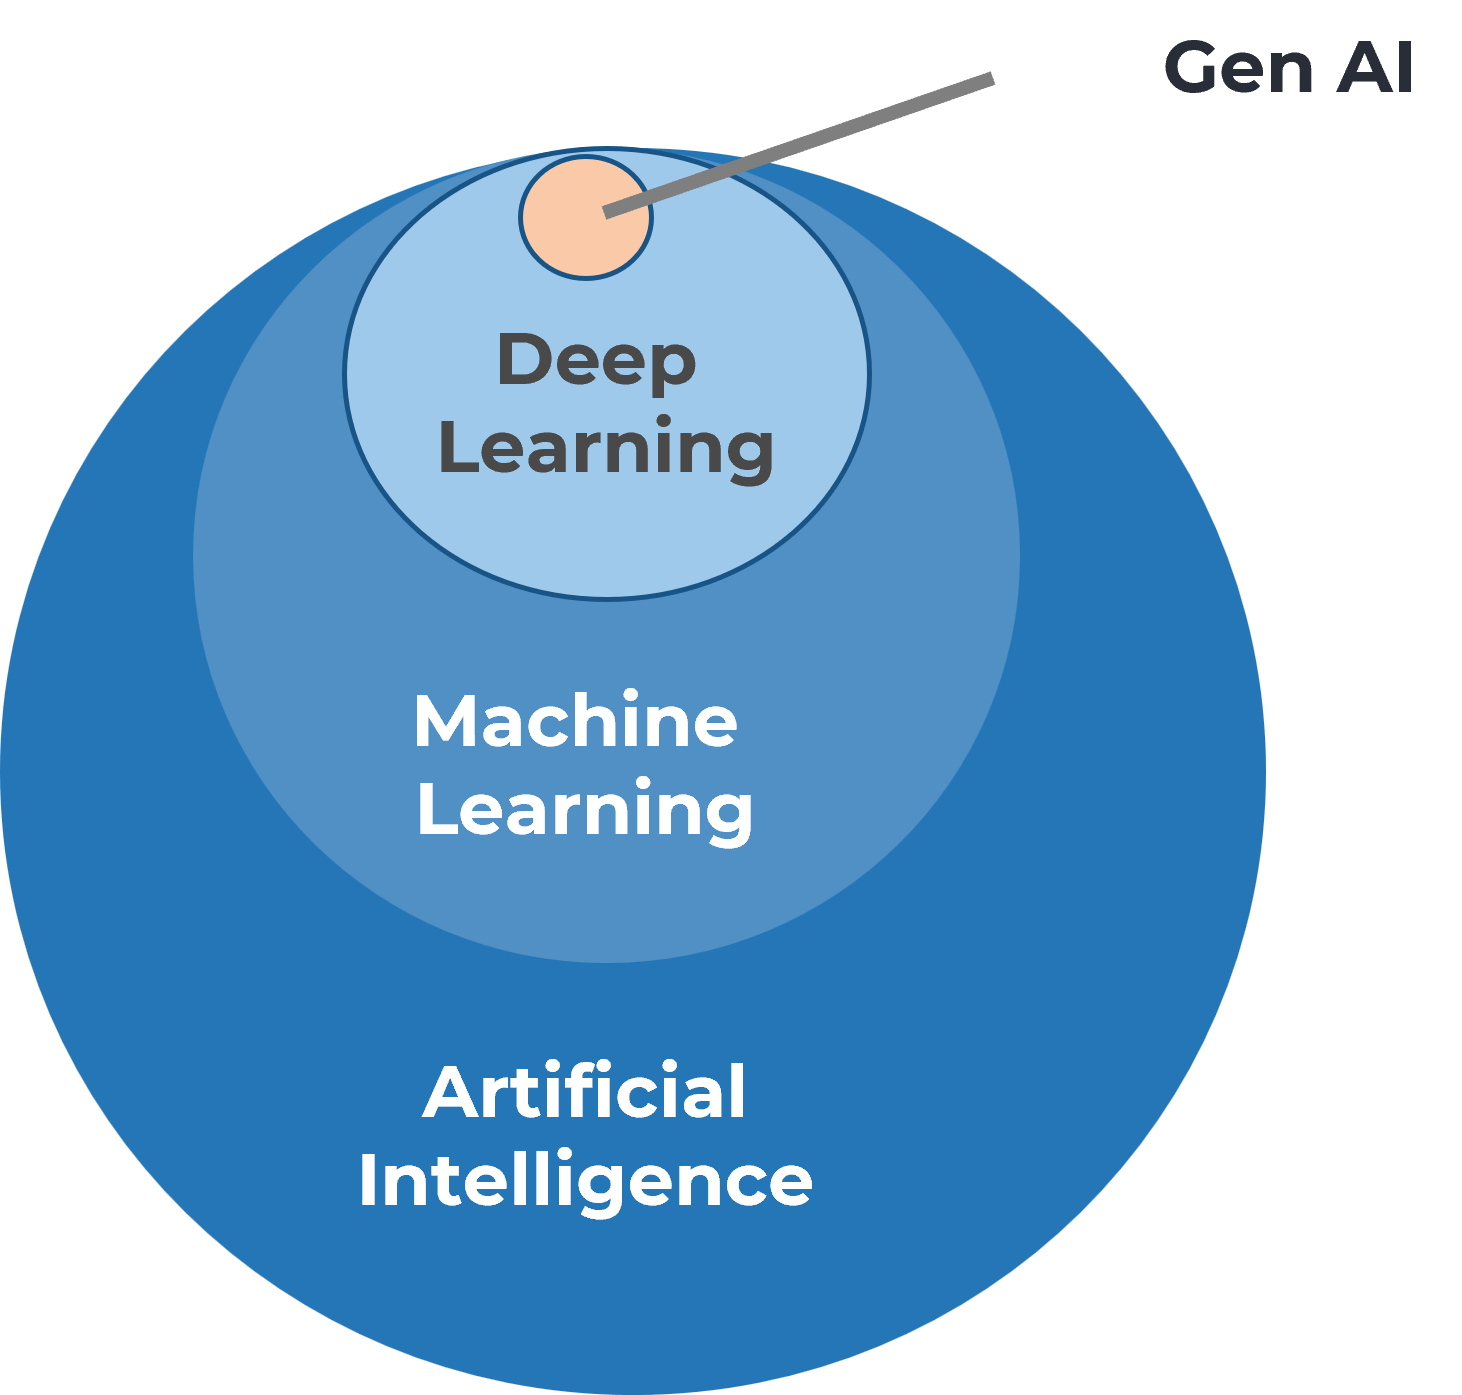 An image showing where Gen AI sits within the artificial intelligence.  It consists of four concentric circles.  They are labeled from outer-to-inner circle in the following order: Artificial Intelligence; Machine Learning; Deep Learning; Gen AI